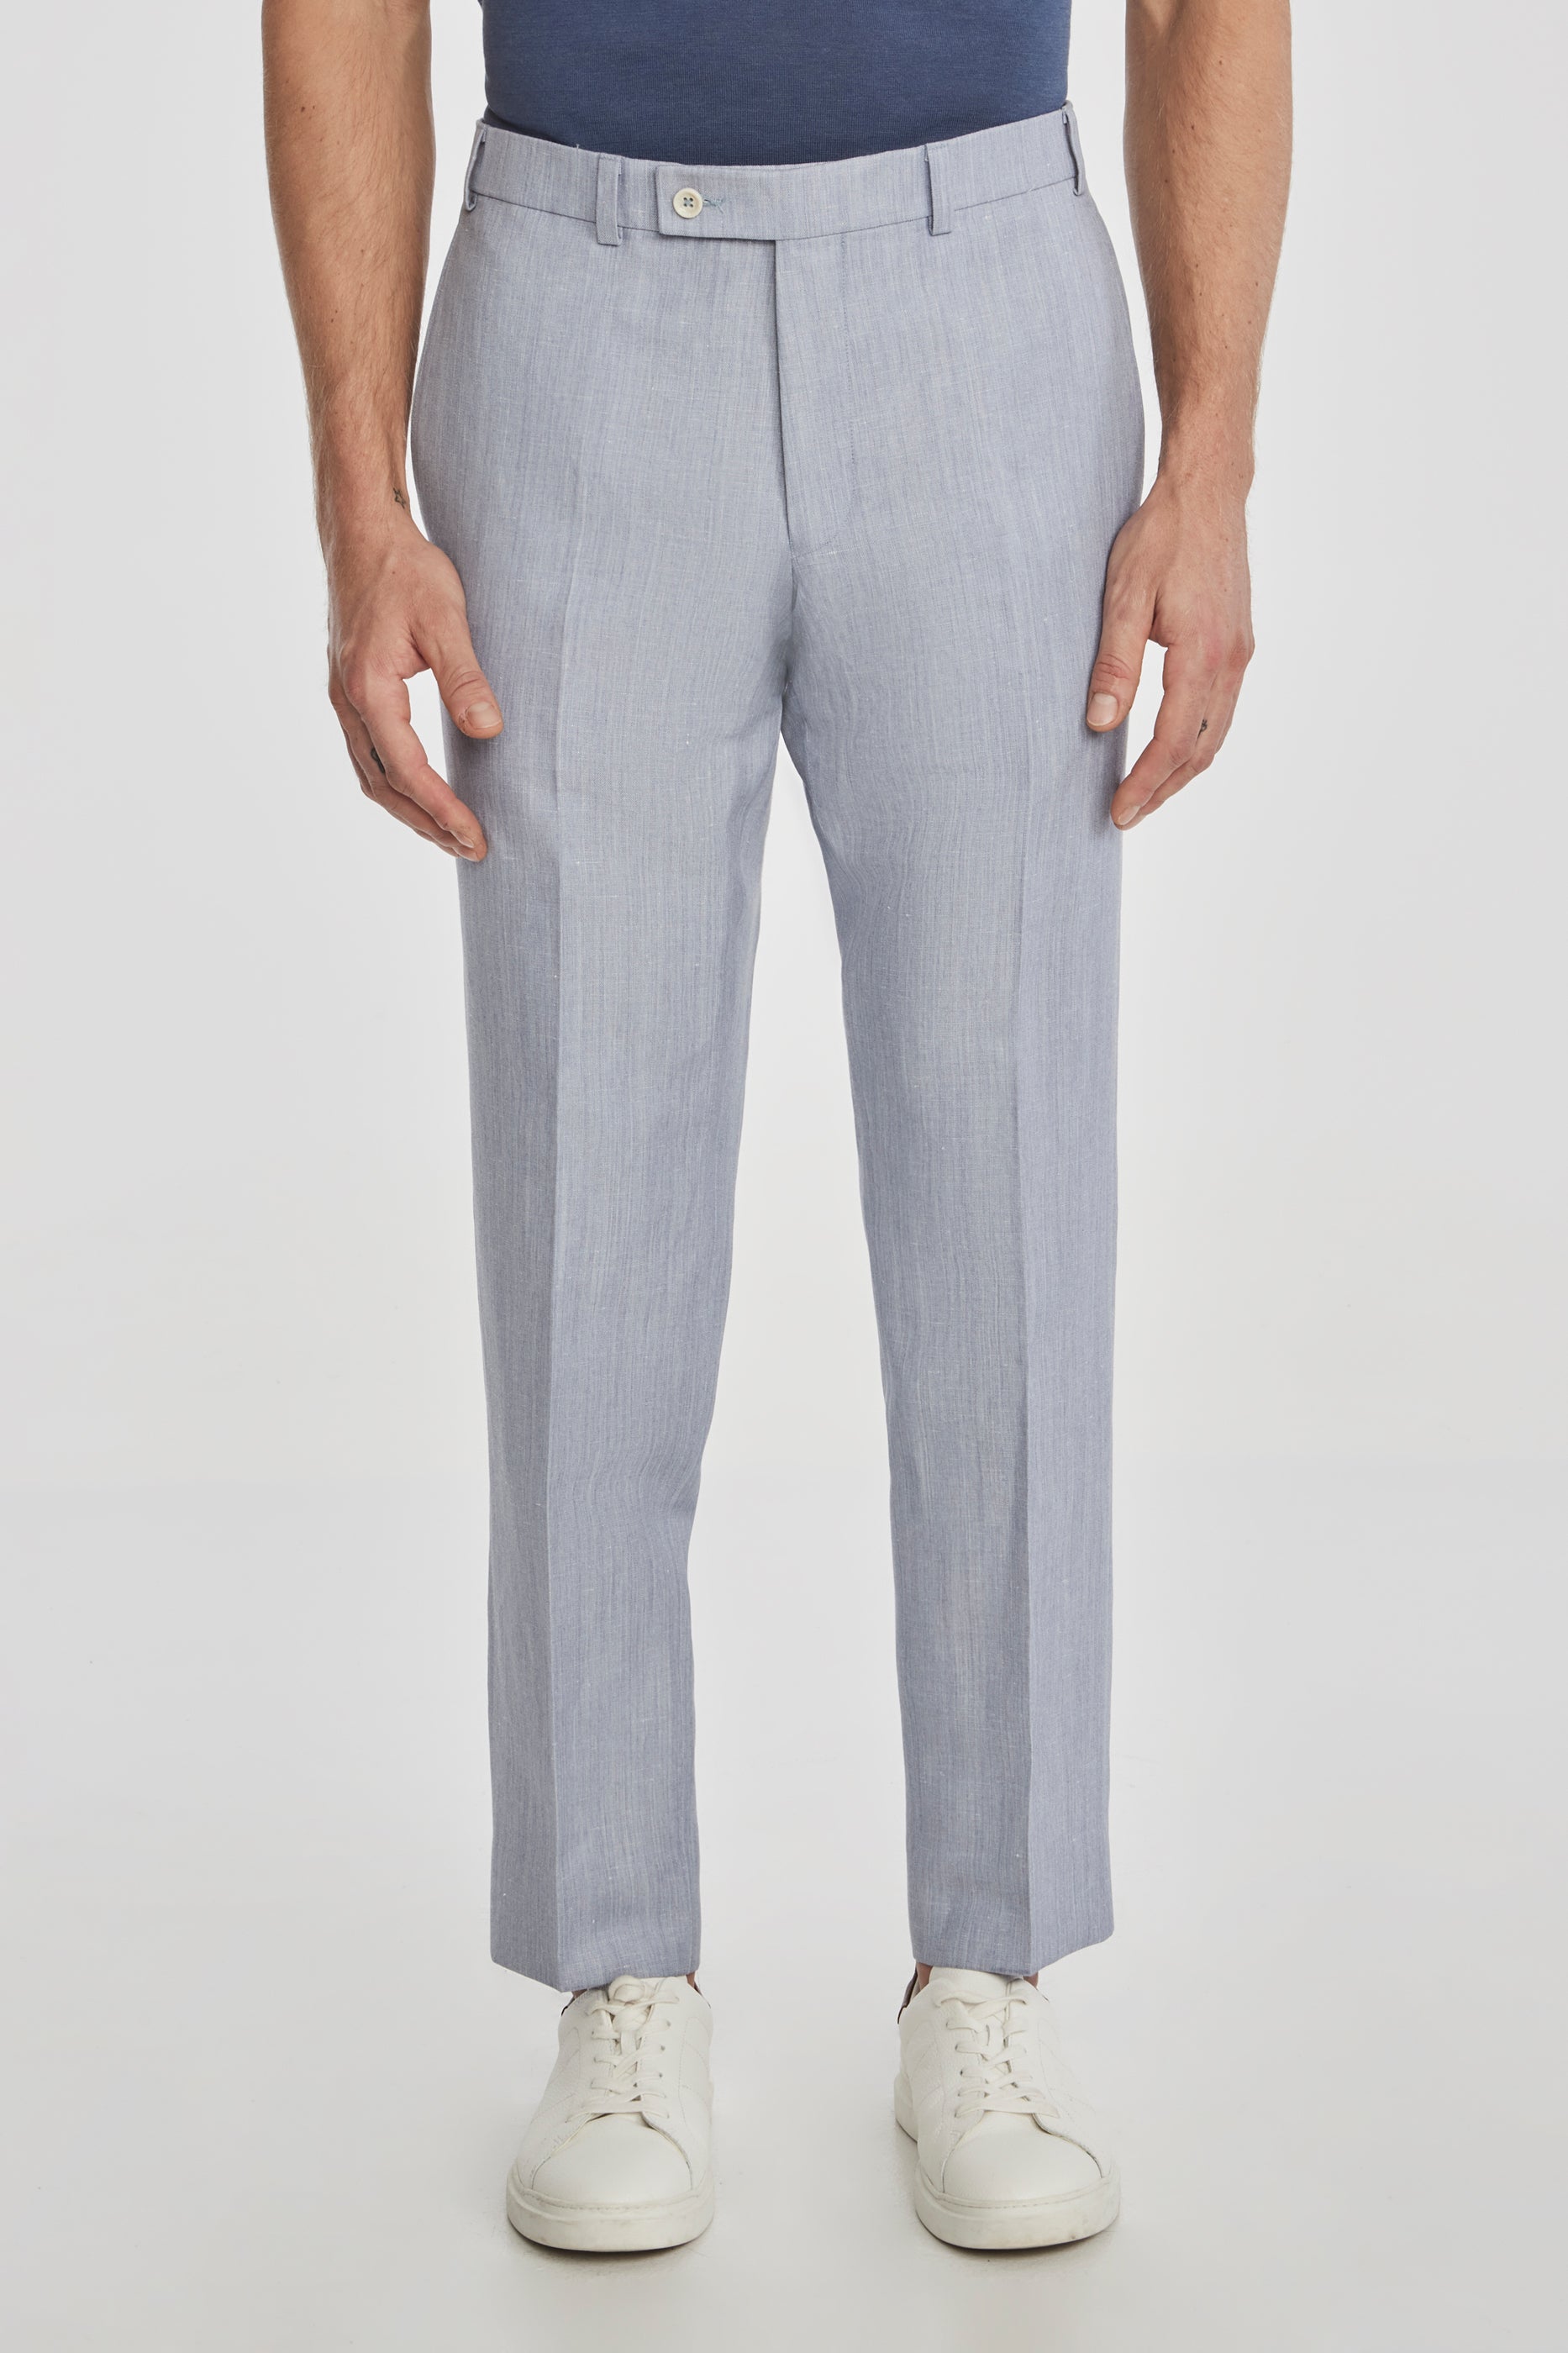 Alt view Pablo Wool and Linen Tailored Trouser in Light Blue